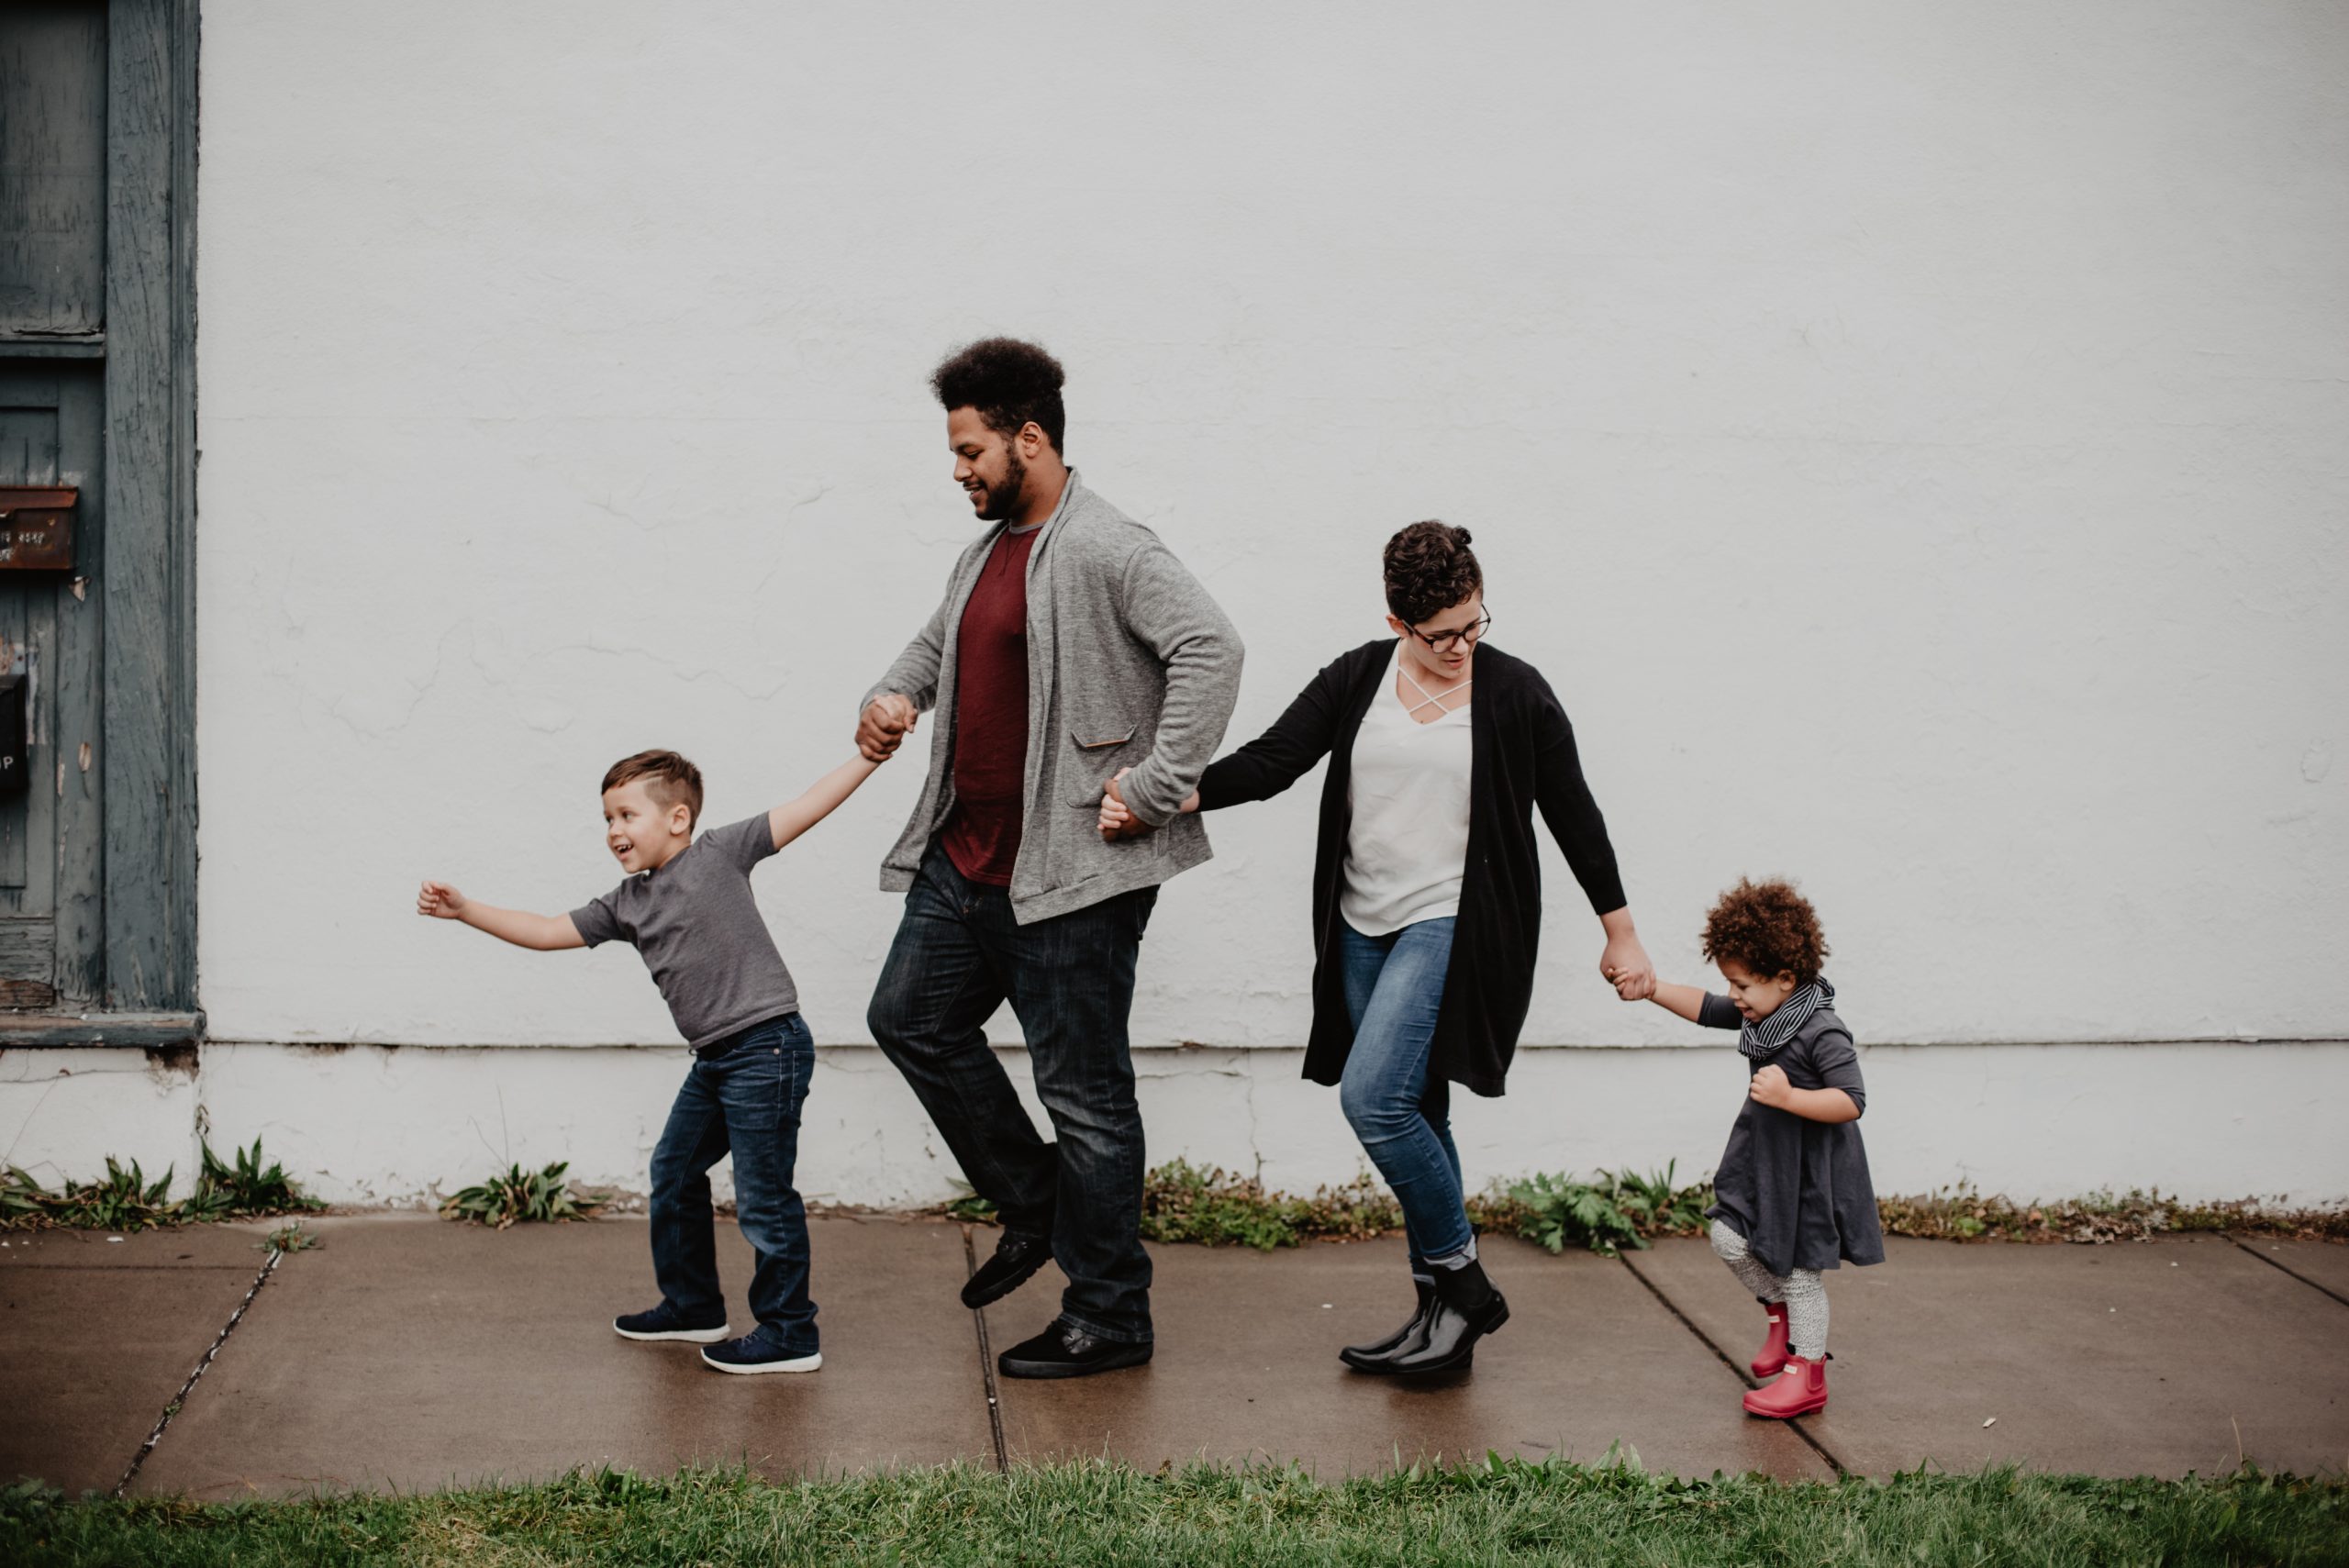 Family with two children, a boy and a girl, joyfully walking together on a sidewalk, depicting a happy family moment.